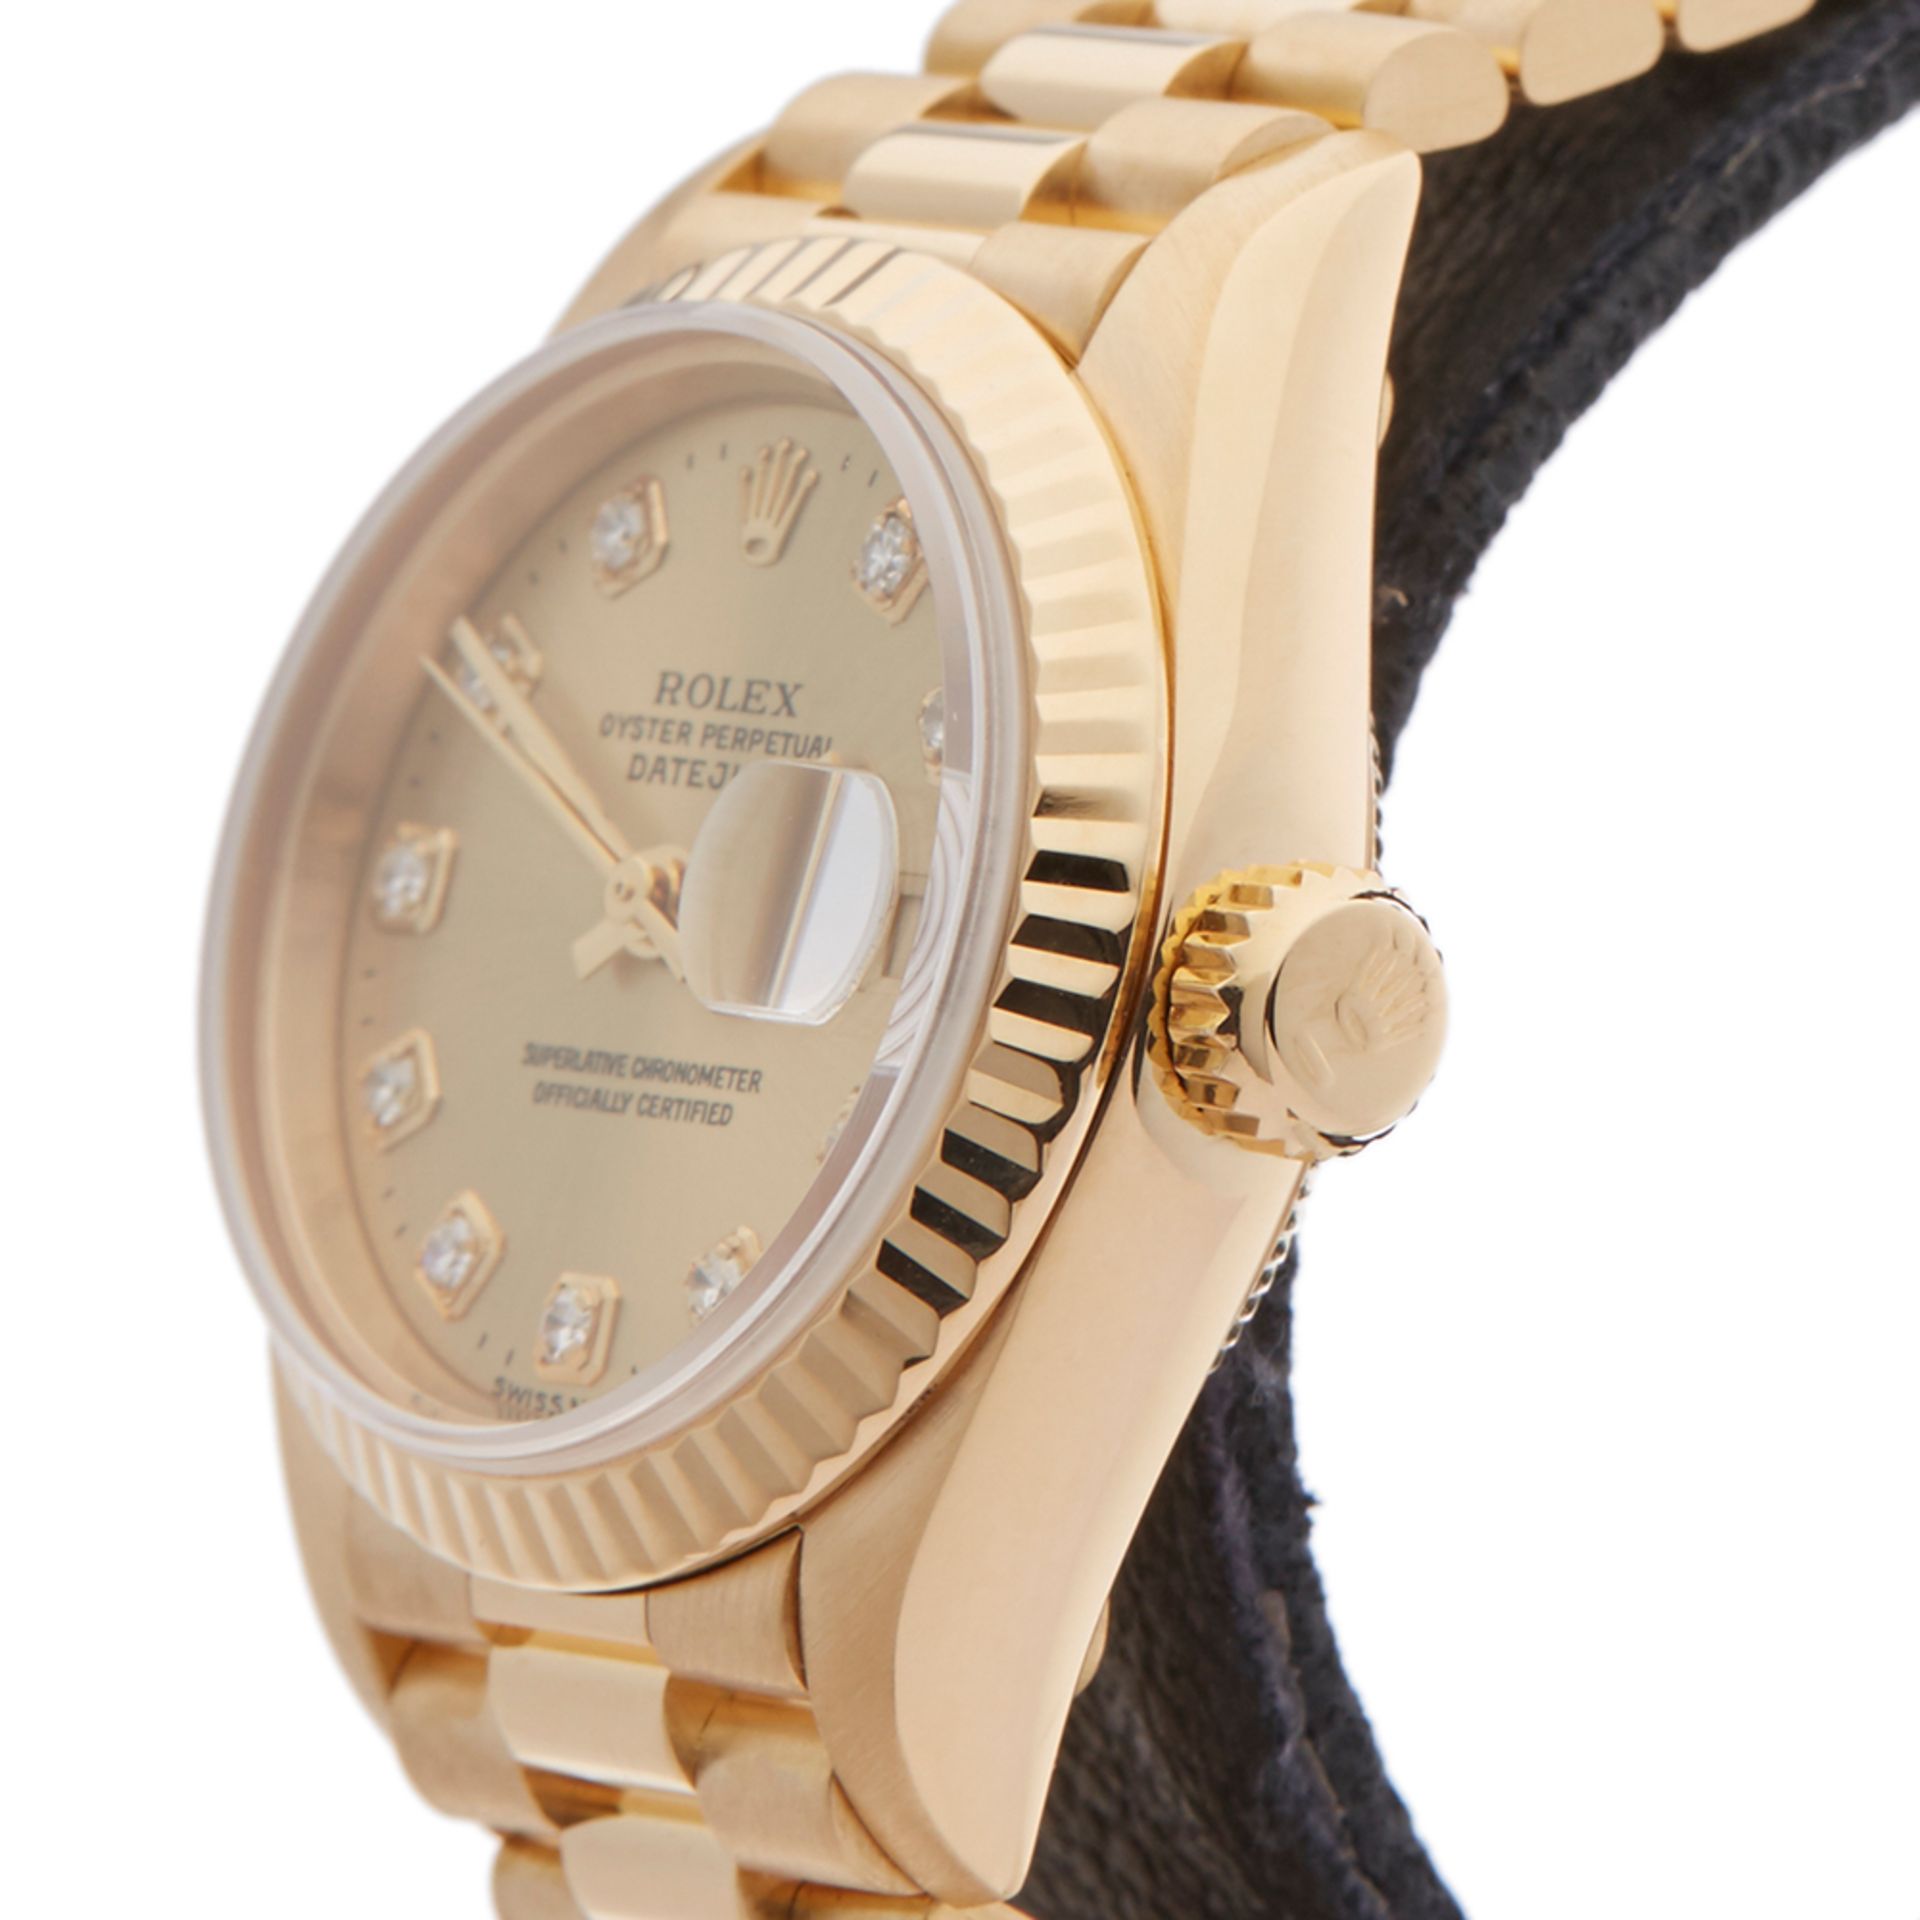 Rolex Datejust 26mm 18k Yellow Gold 69178 - Image 4 of 9